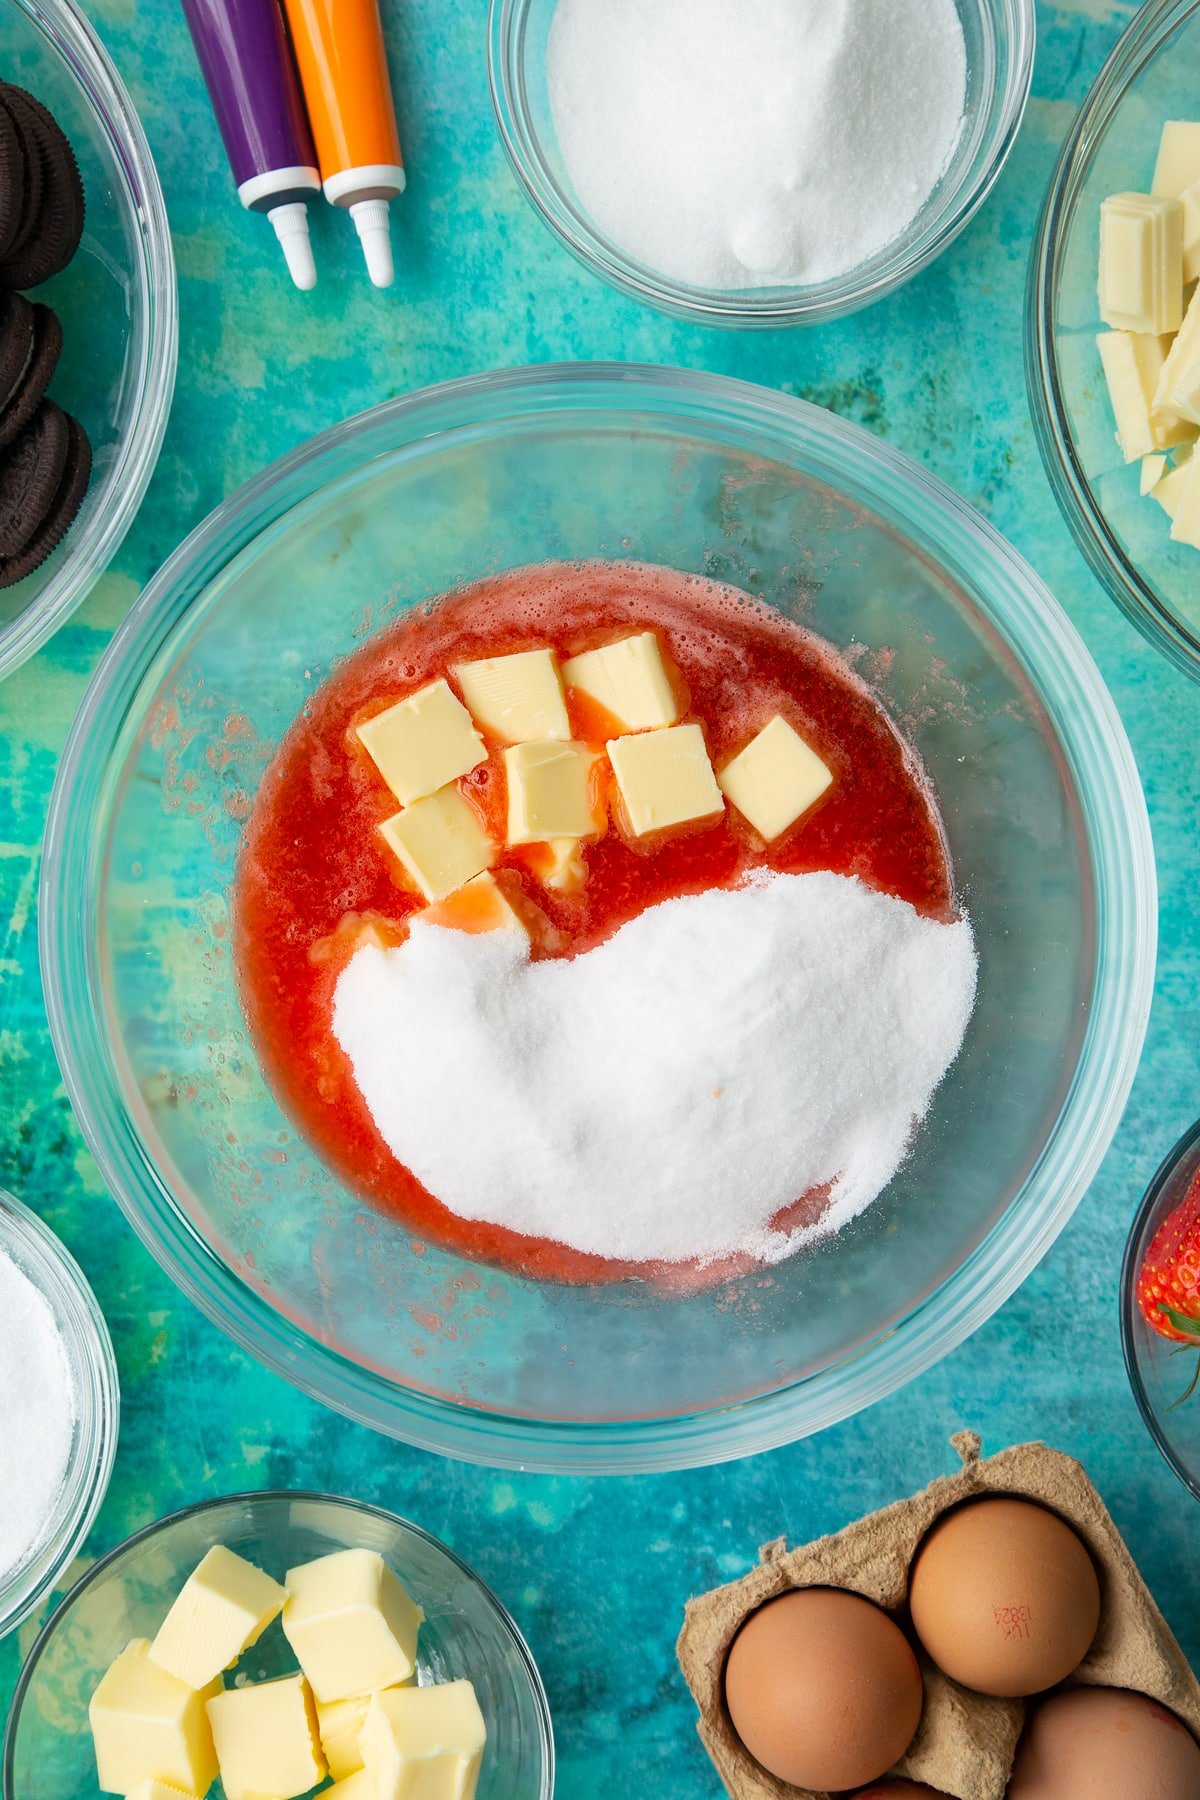 Strawberry juice, sugar and cubed butter in a bowl. Ingredients to make Halloween cheesecake surround the bowl.